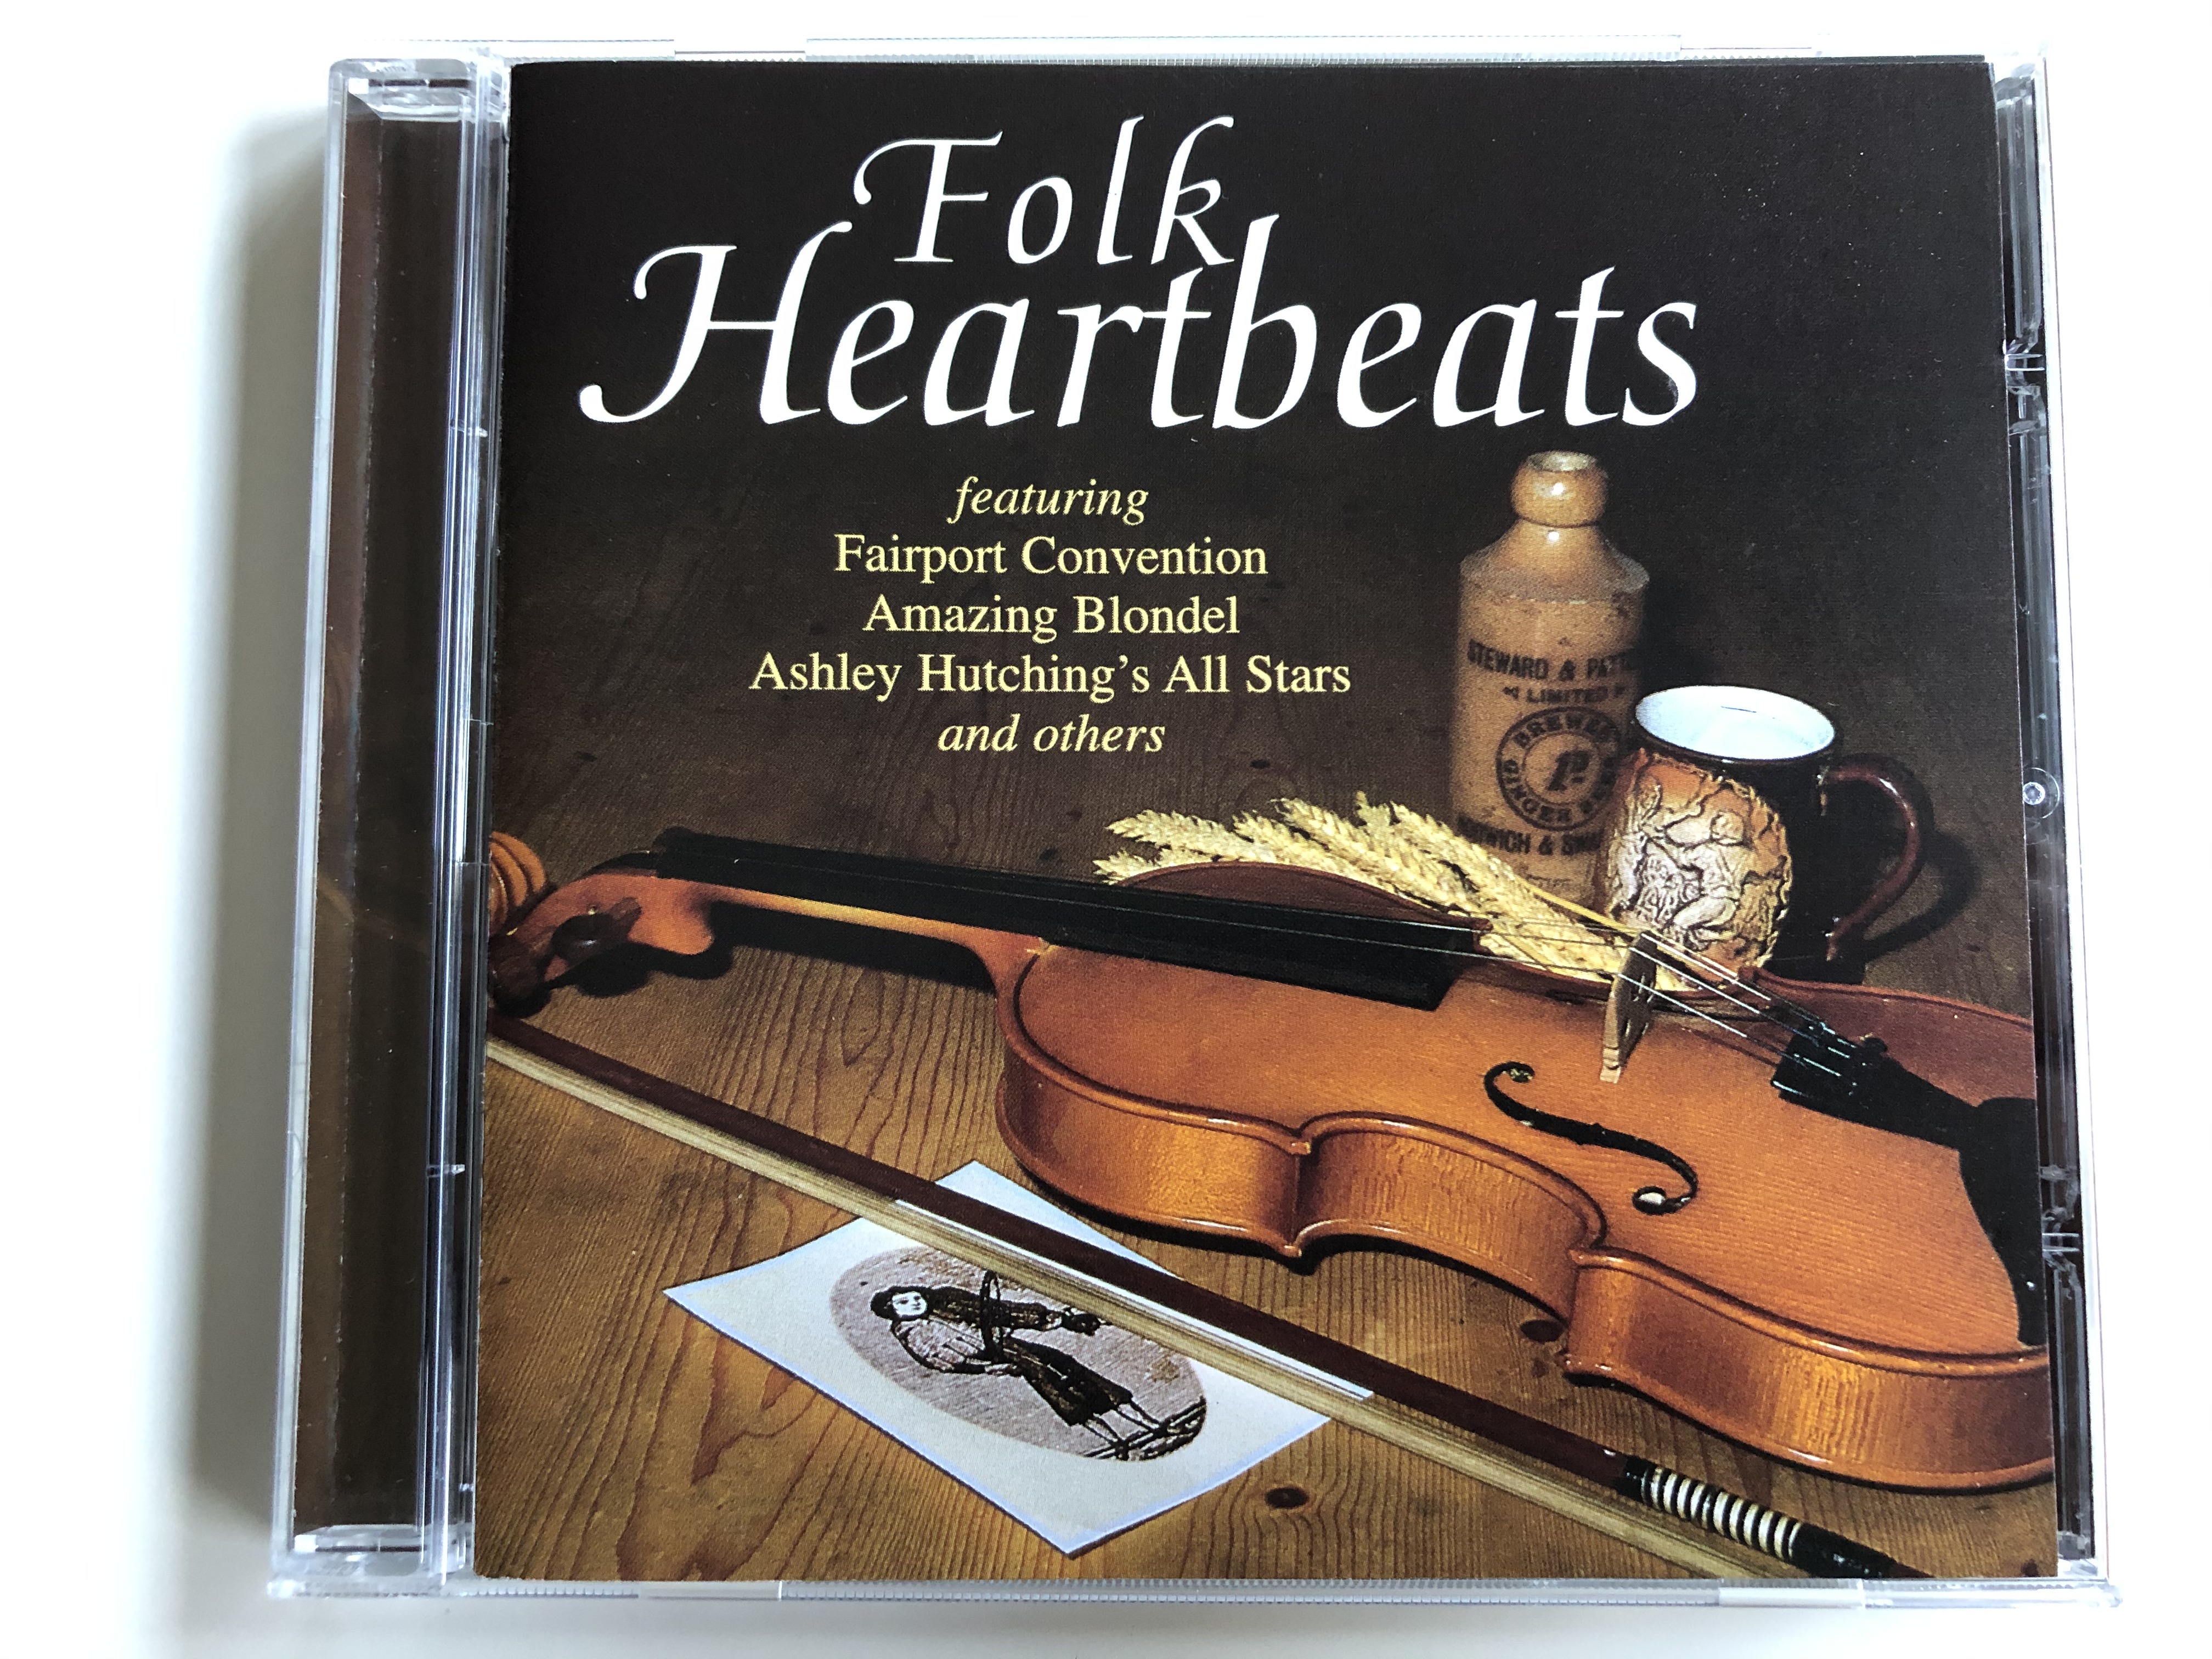 folk-heartbeats-featuring-fairport-convention-amazing-blondel-ashley-hutching-s-all-stars-and-others-e2-audio-cd-1998-etdcd018-1-.jpg